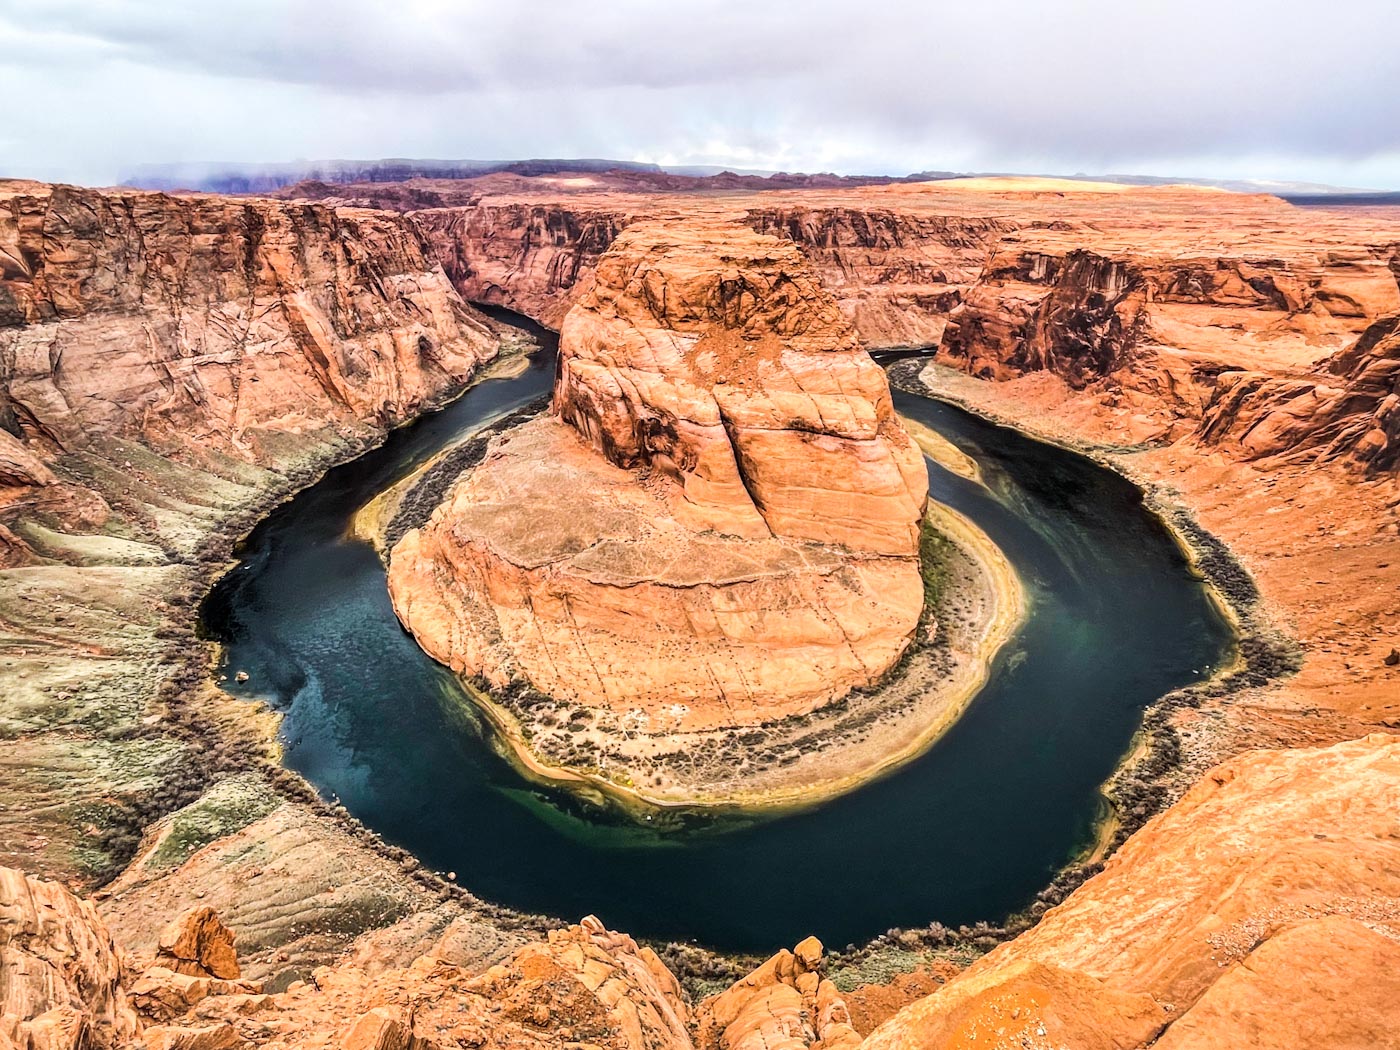 The viewpoint at Horseshoe Bend overlooking the Colorado River